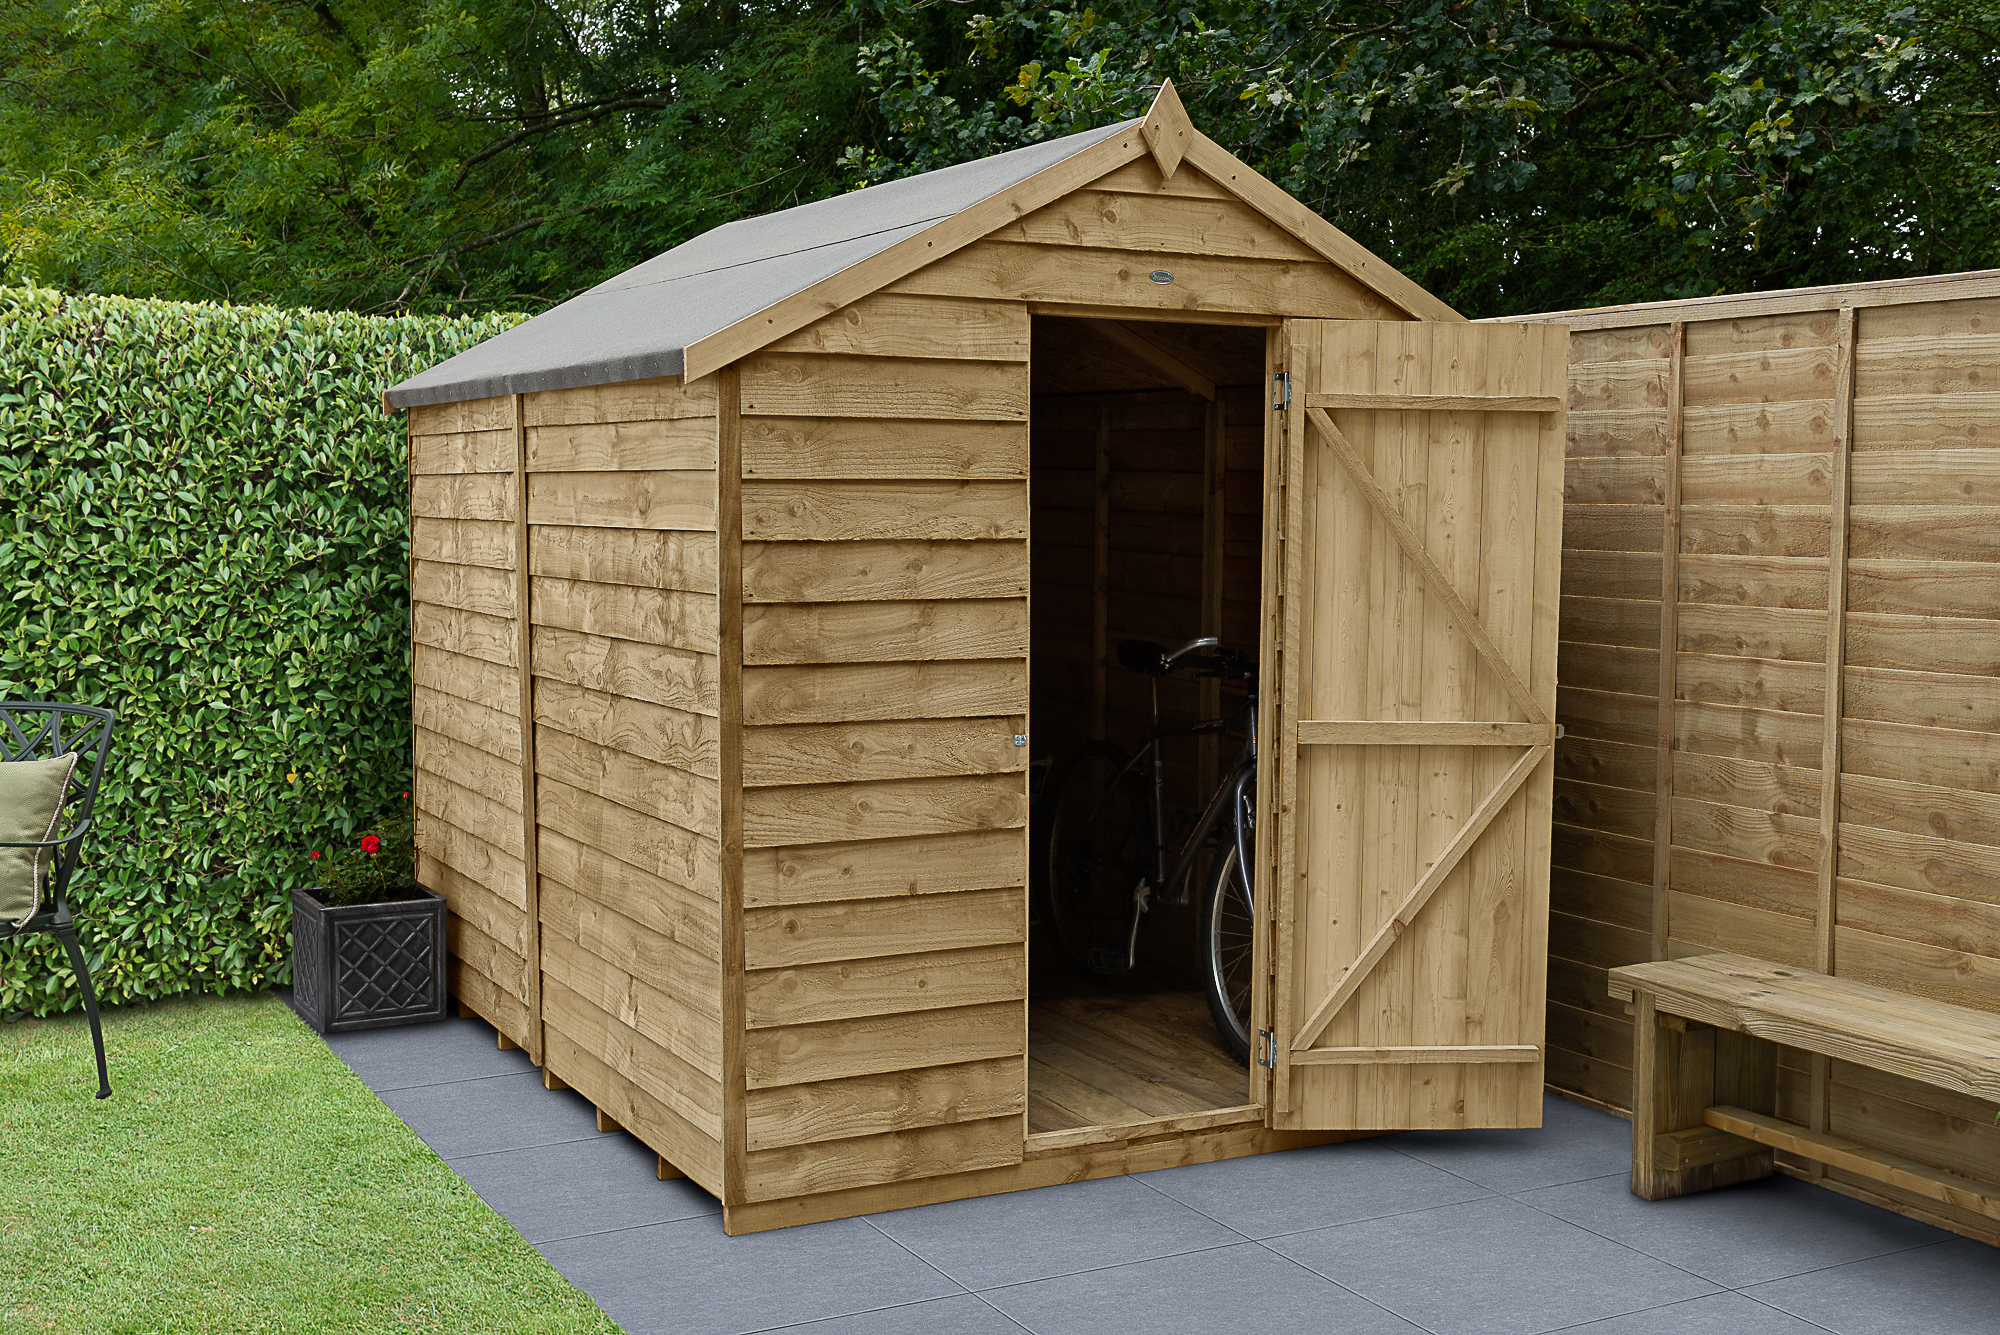 Forest Garden 6 x 8ft 4Life Apex Overlap Pressure Treated Windowless Shed